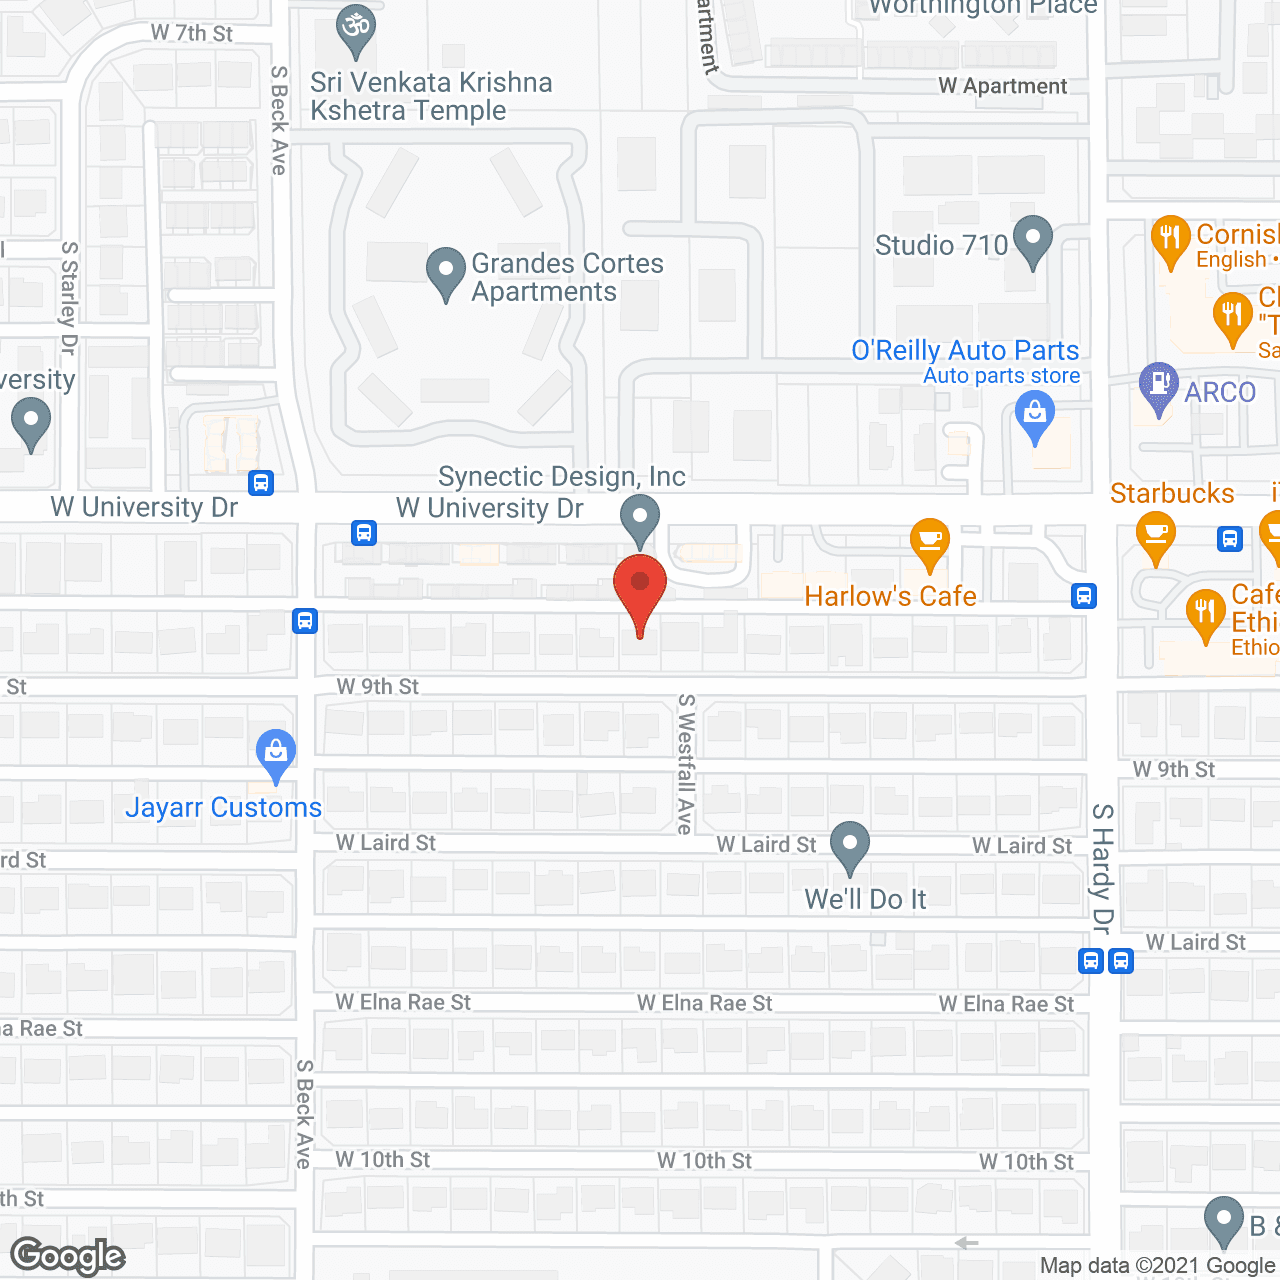 NDG Adult Care Home, LLC in google map